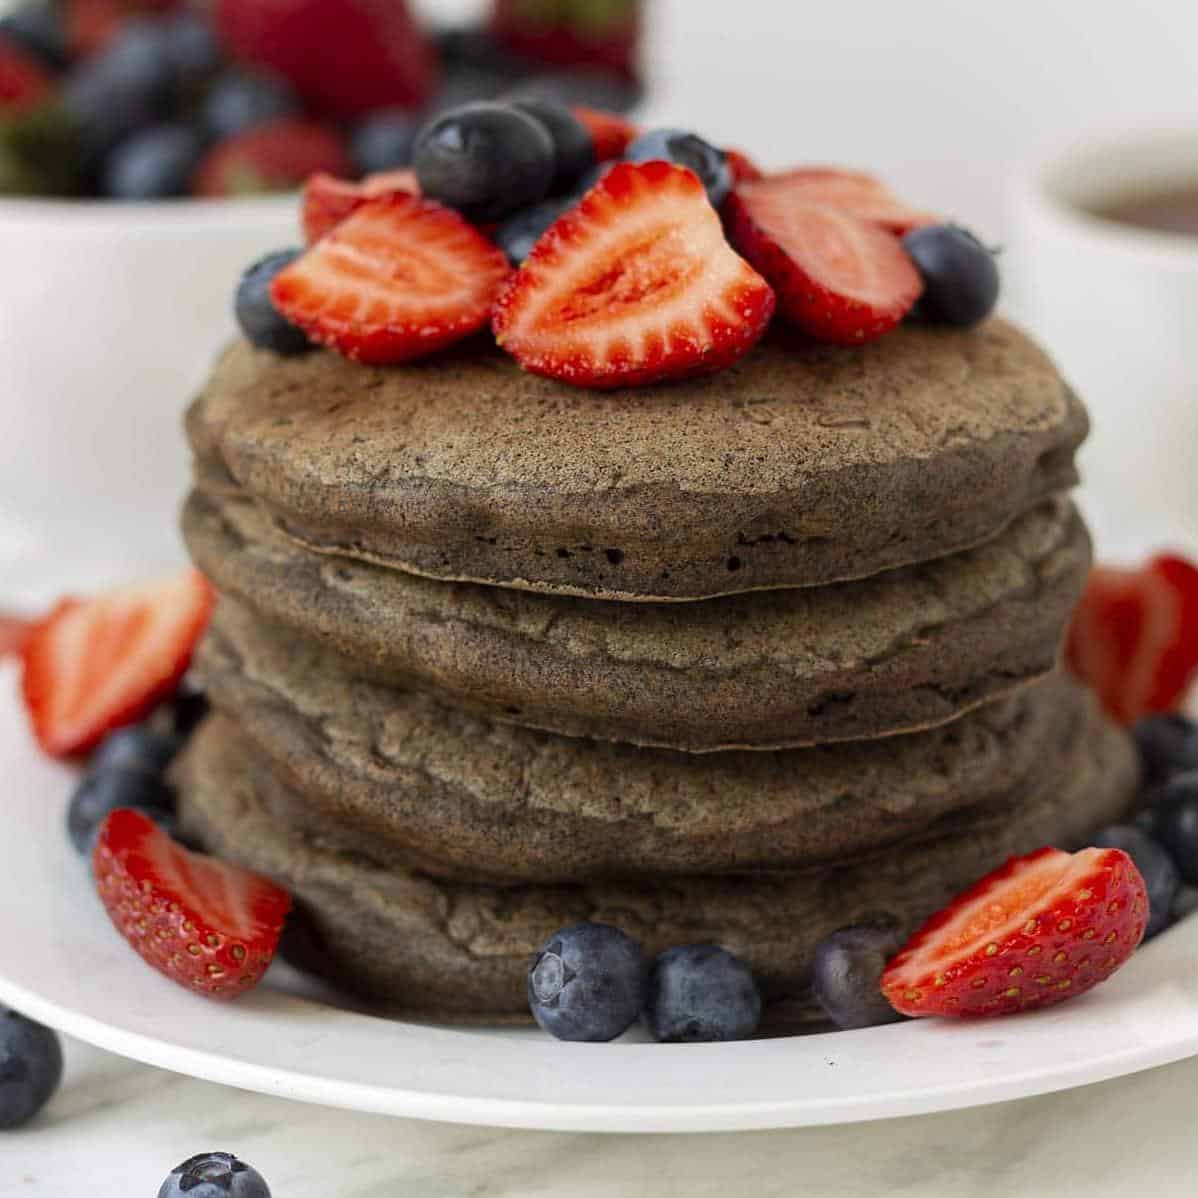  Buckwheat flour adds a subtle nuttiness to the pancakes, making them truly irresistible.